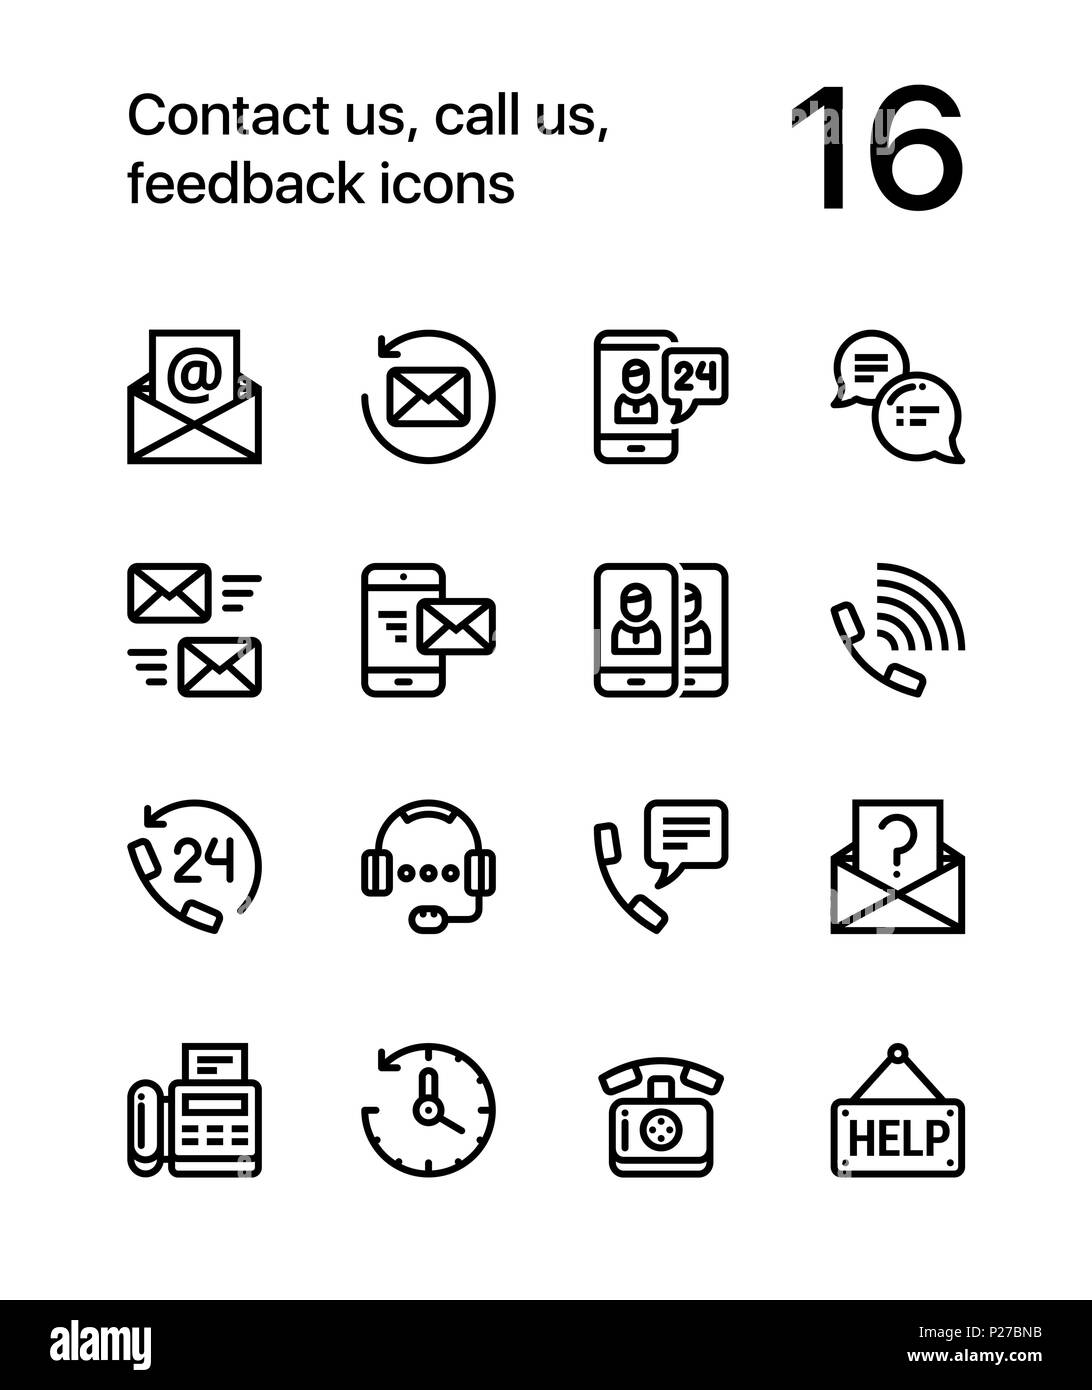 Contact us, call us, feedback icons for web and mobile design pack 2 Stock Vector